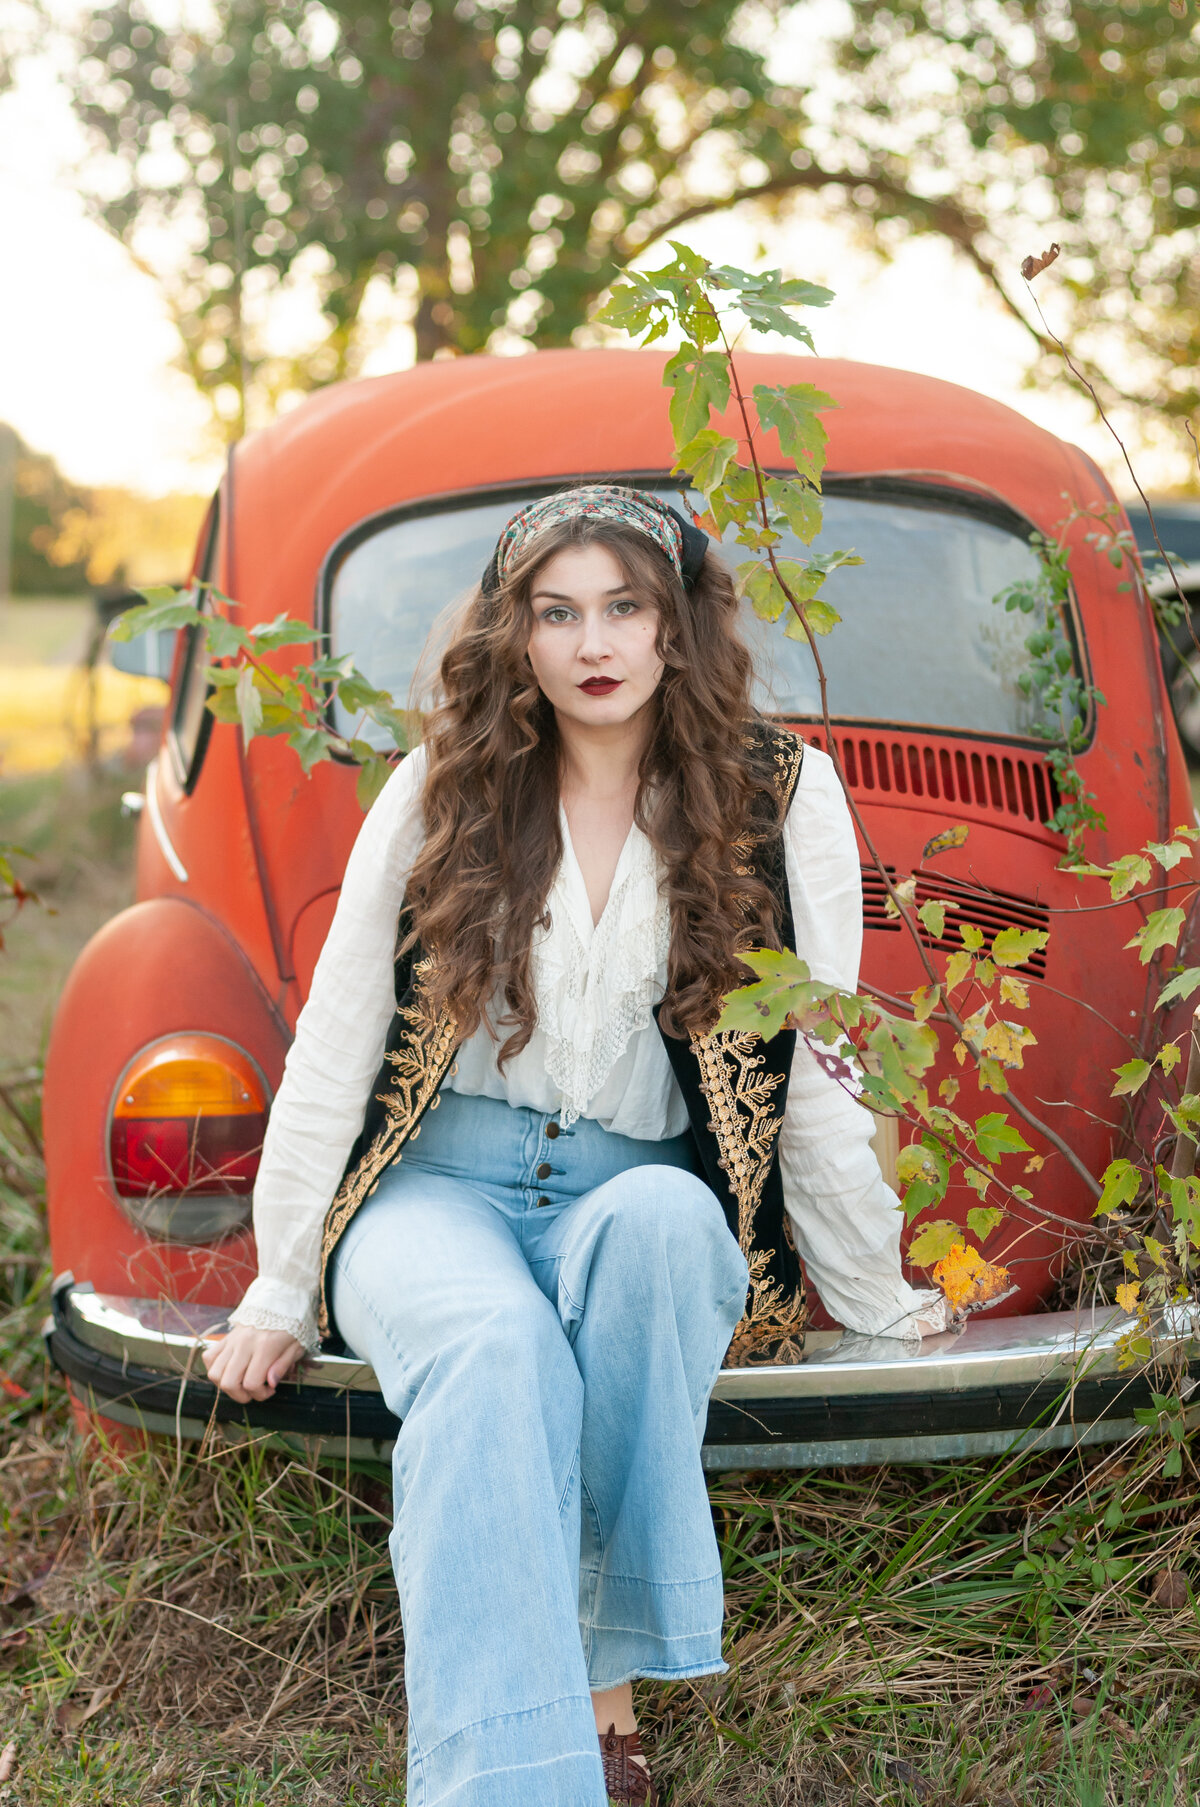 Kentucky Photographer: Portrait of a woman on the back of a red vintage car.